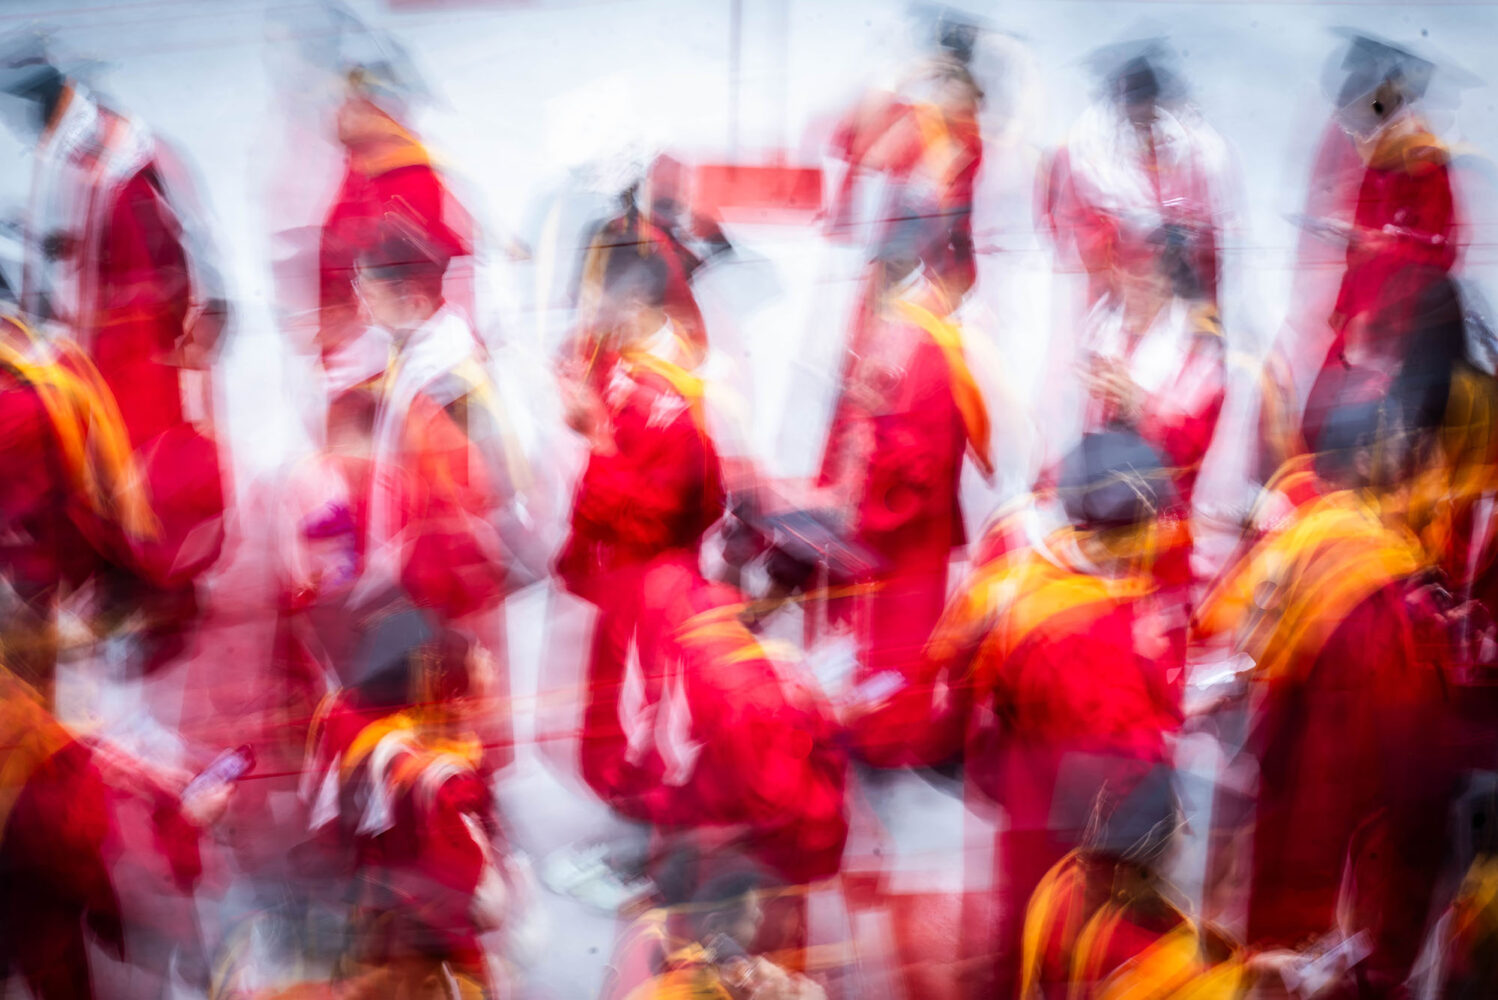 Photo: A stylistically blurry picture of many students in black graduation caps and red gowns